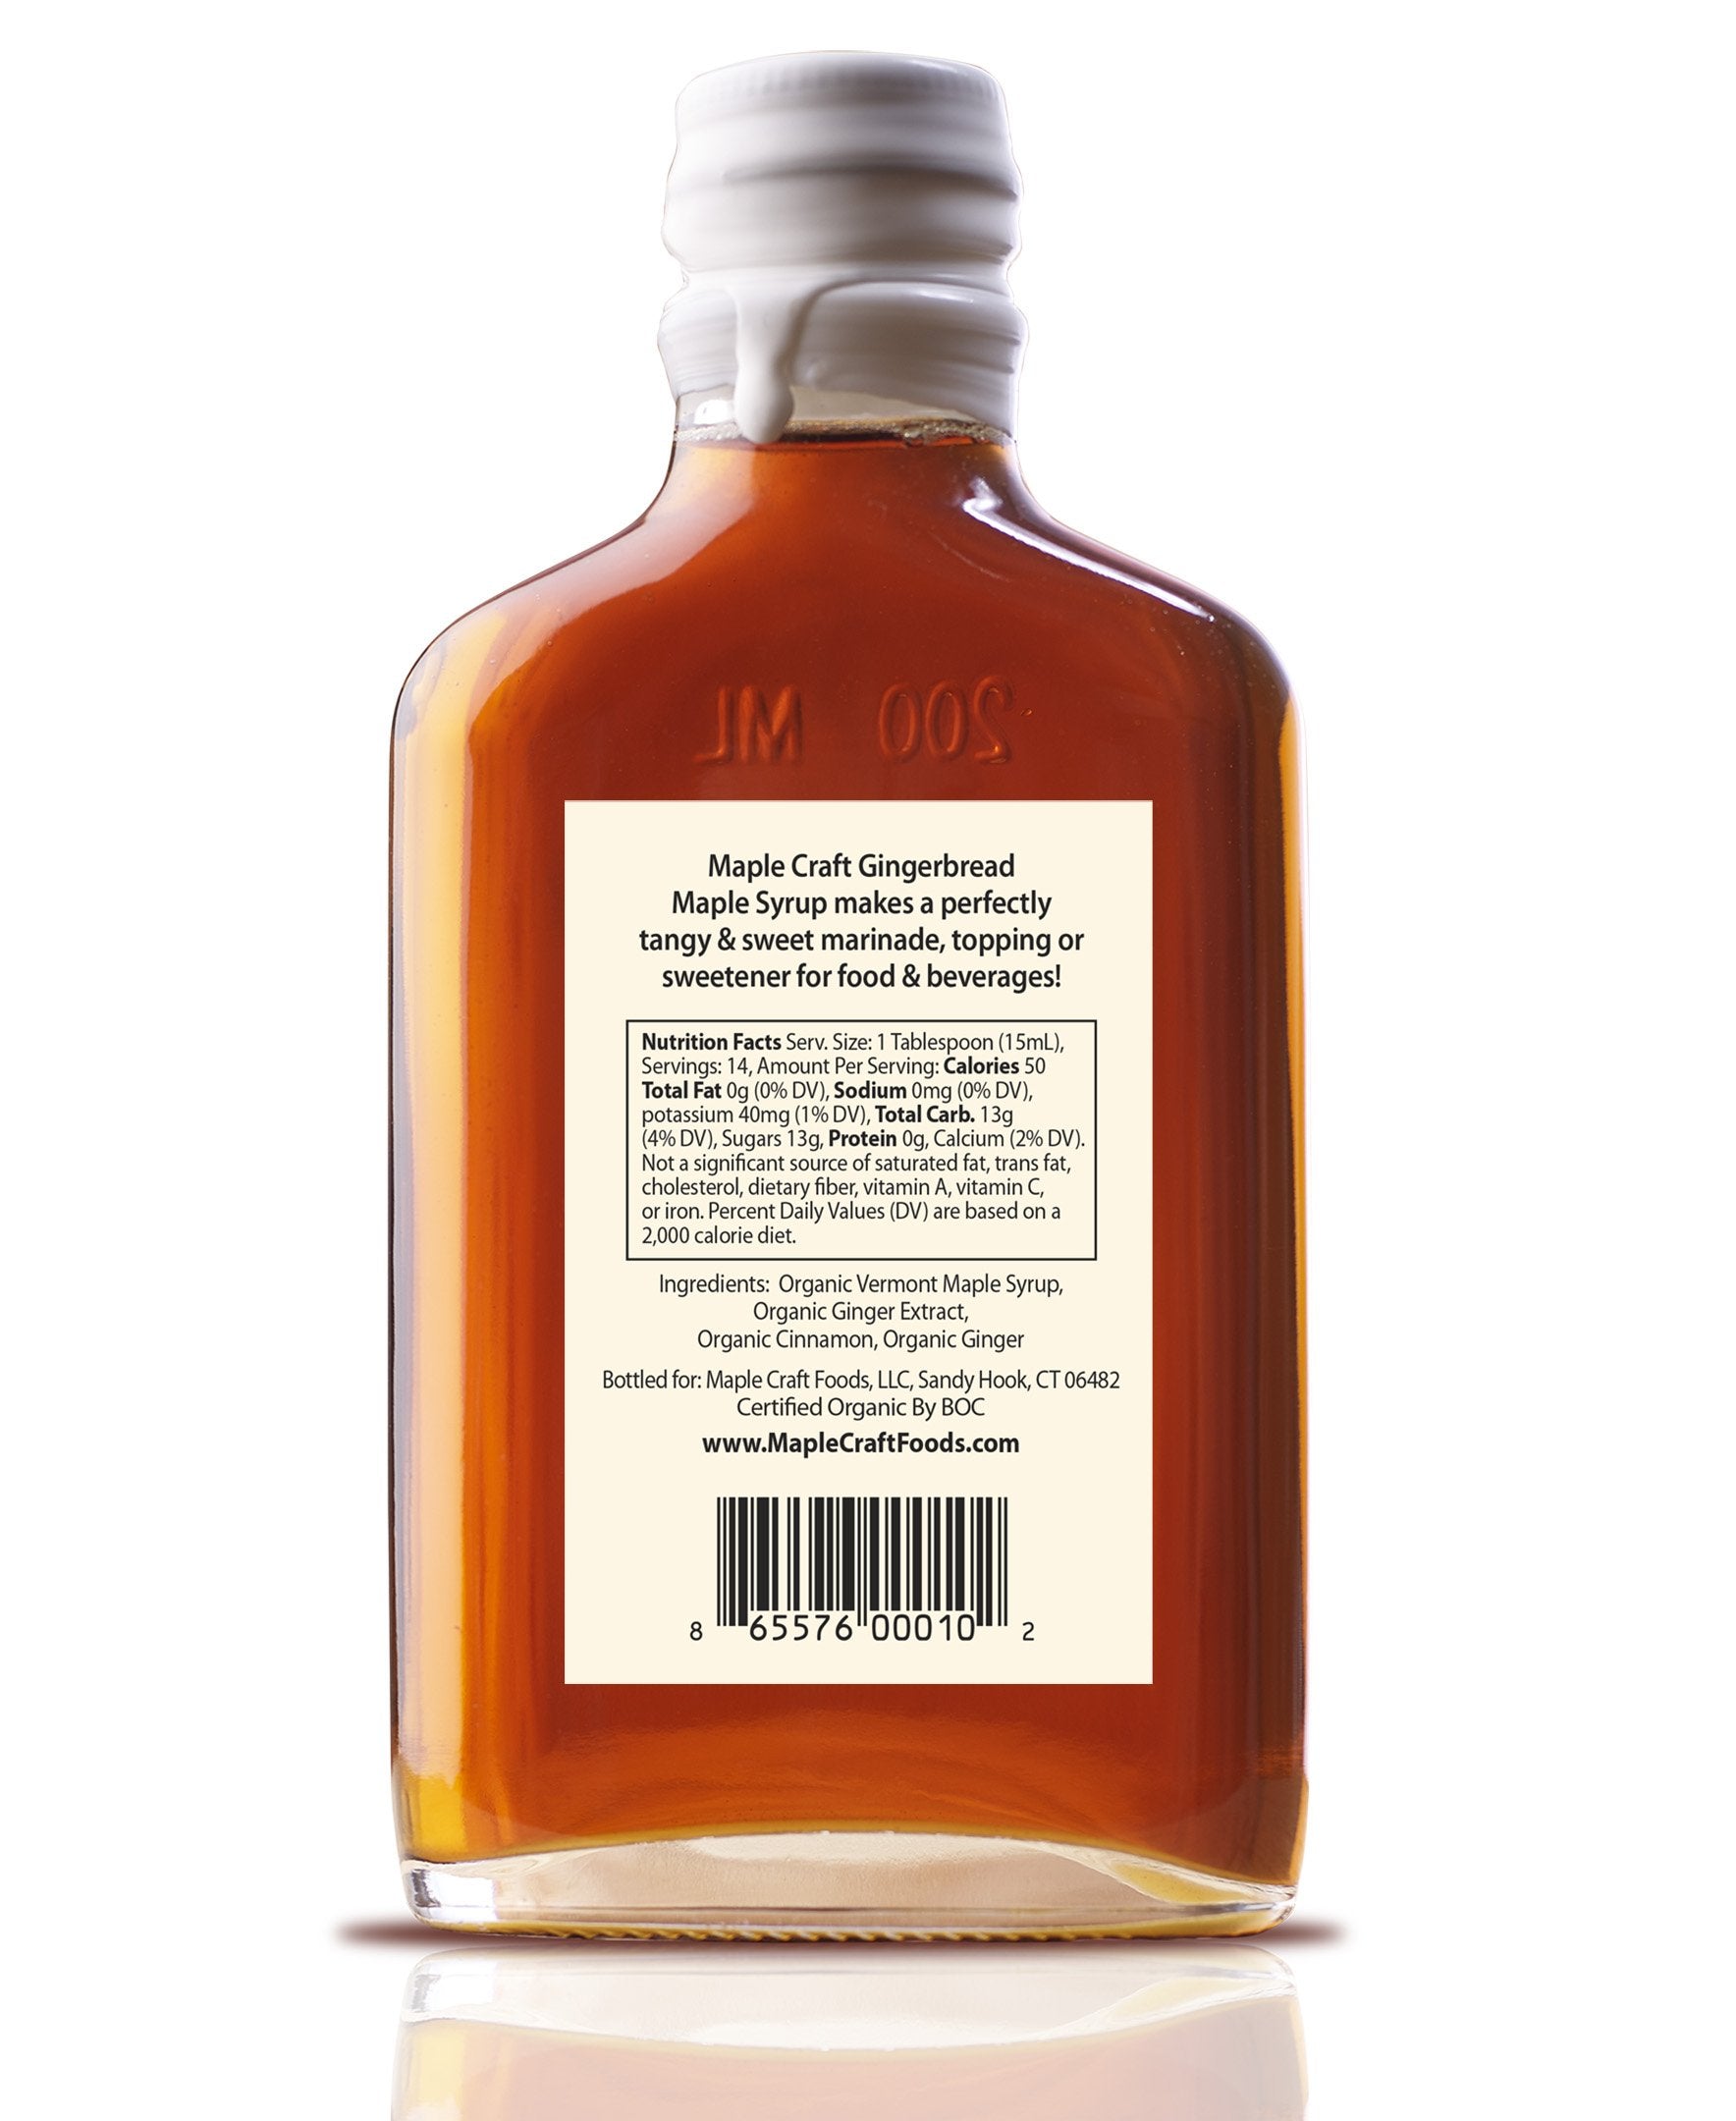 Gingerbread Maple Craft Syrup (Organic)